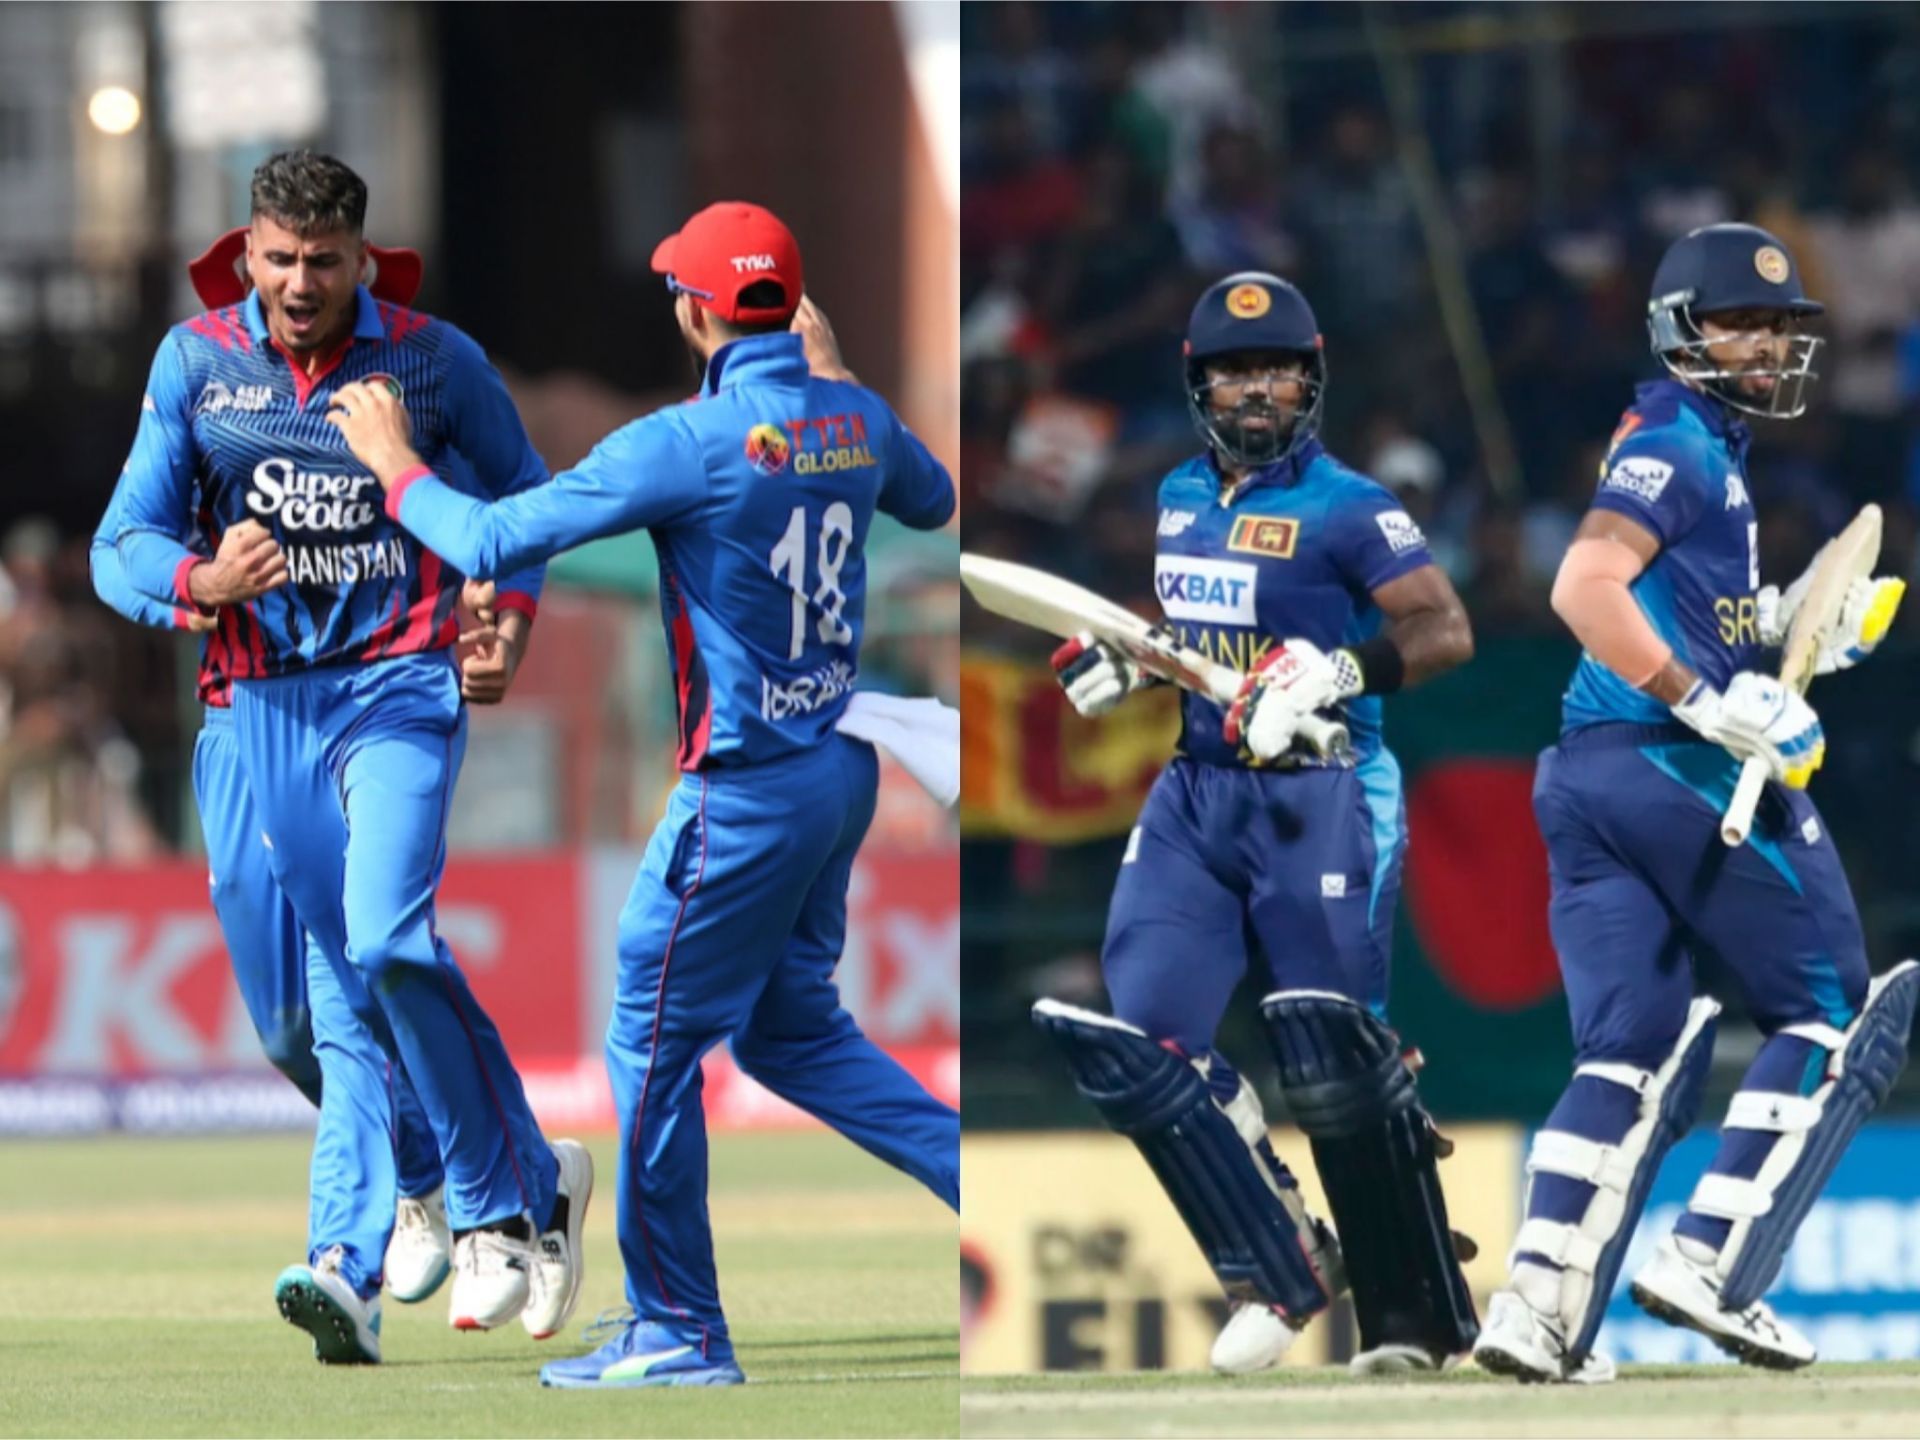 Afghanistan will square off against Sri Lanka on Tuesday [ACC]